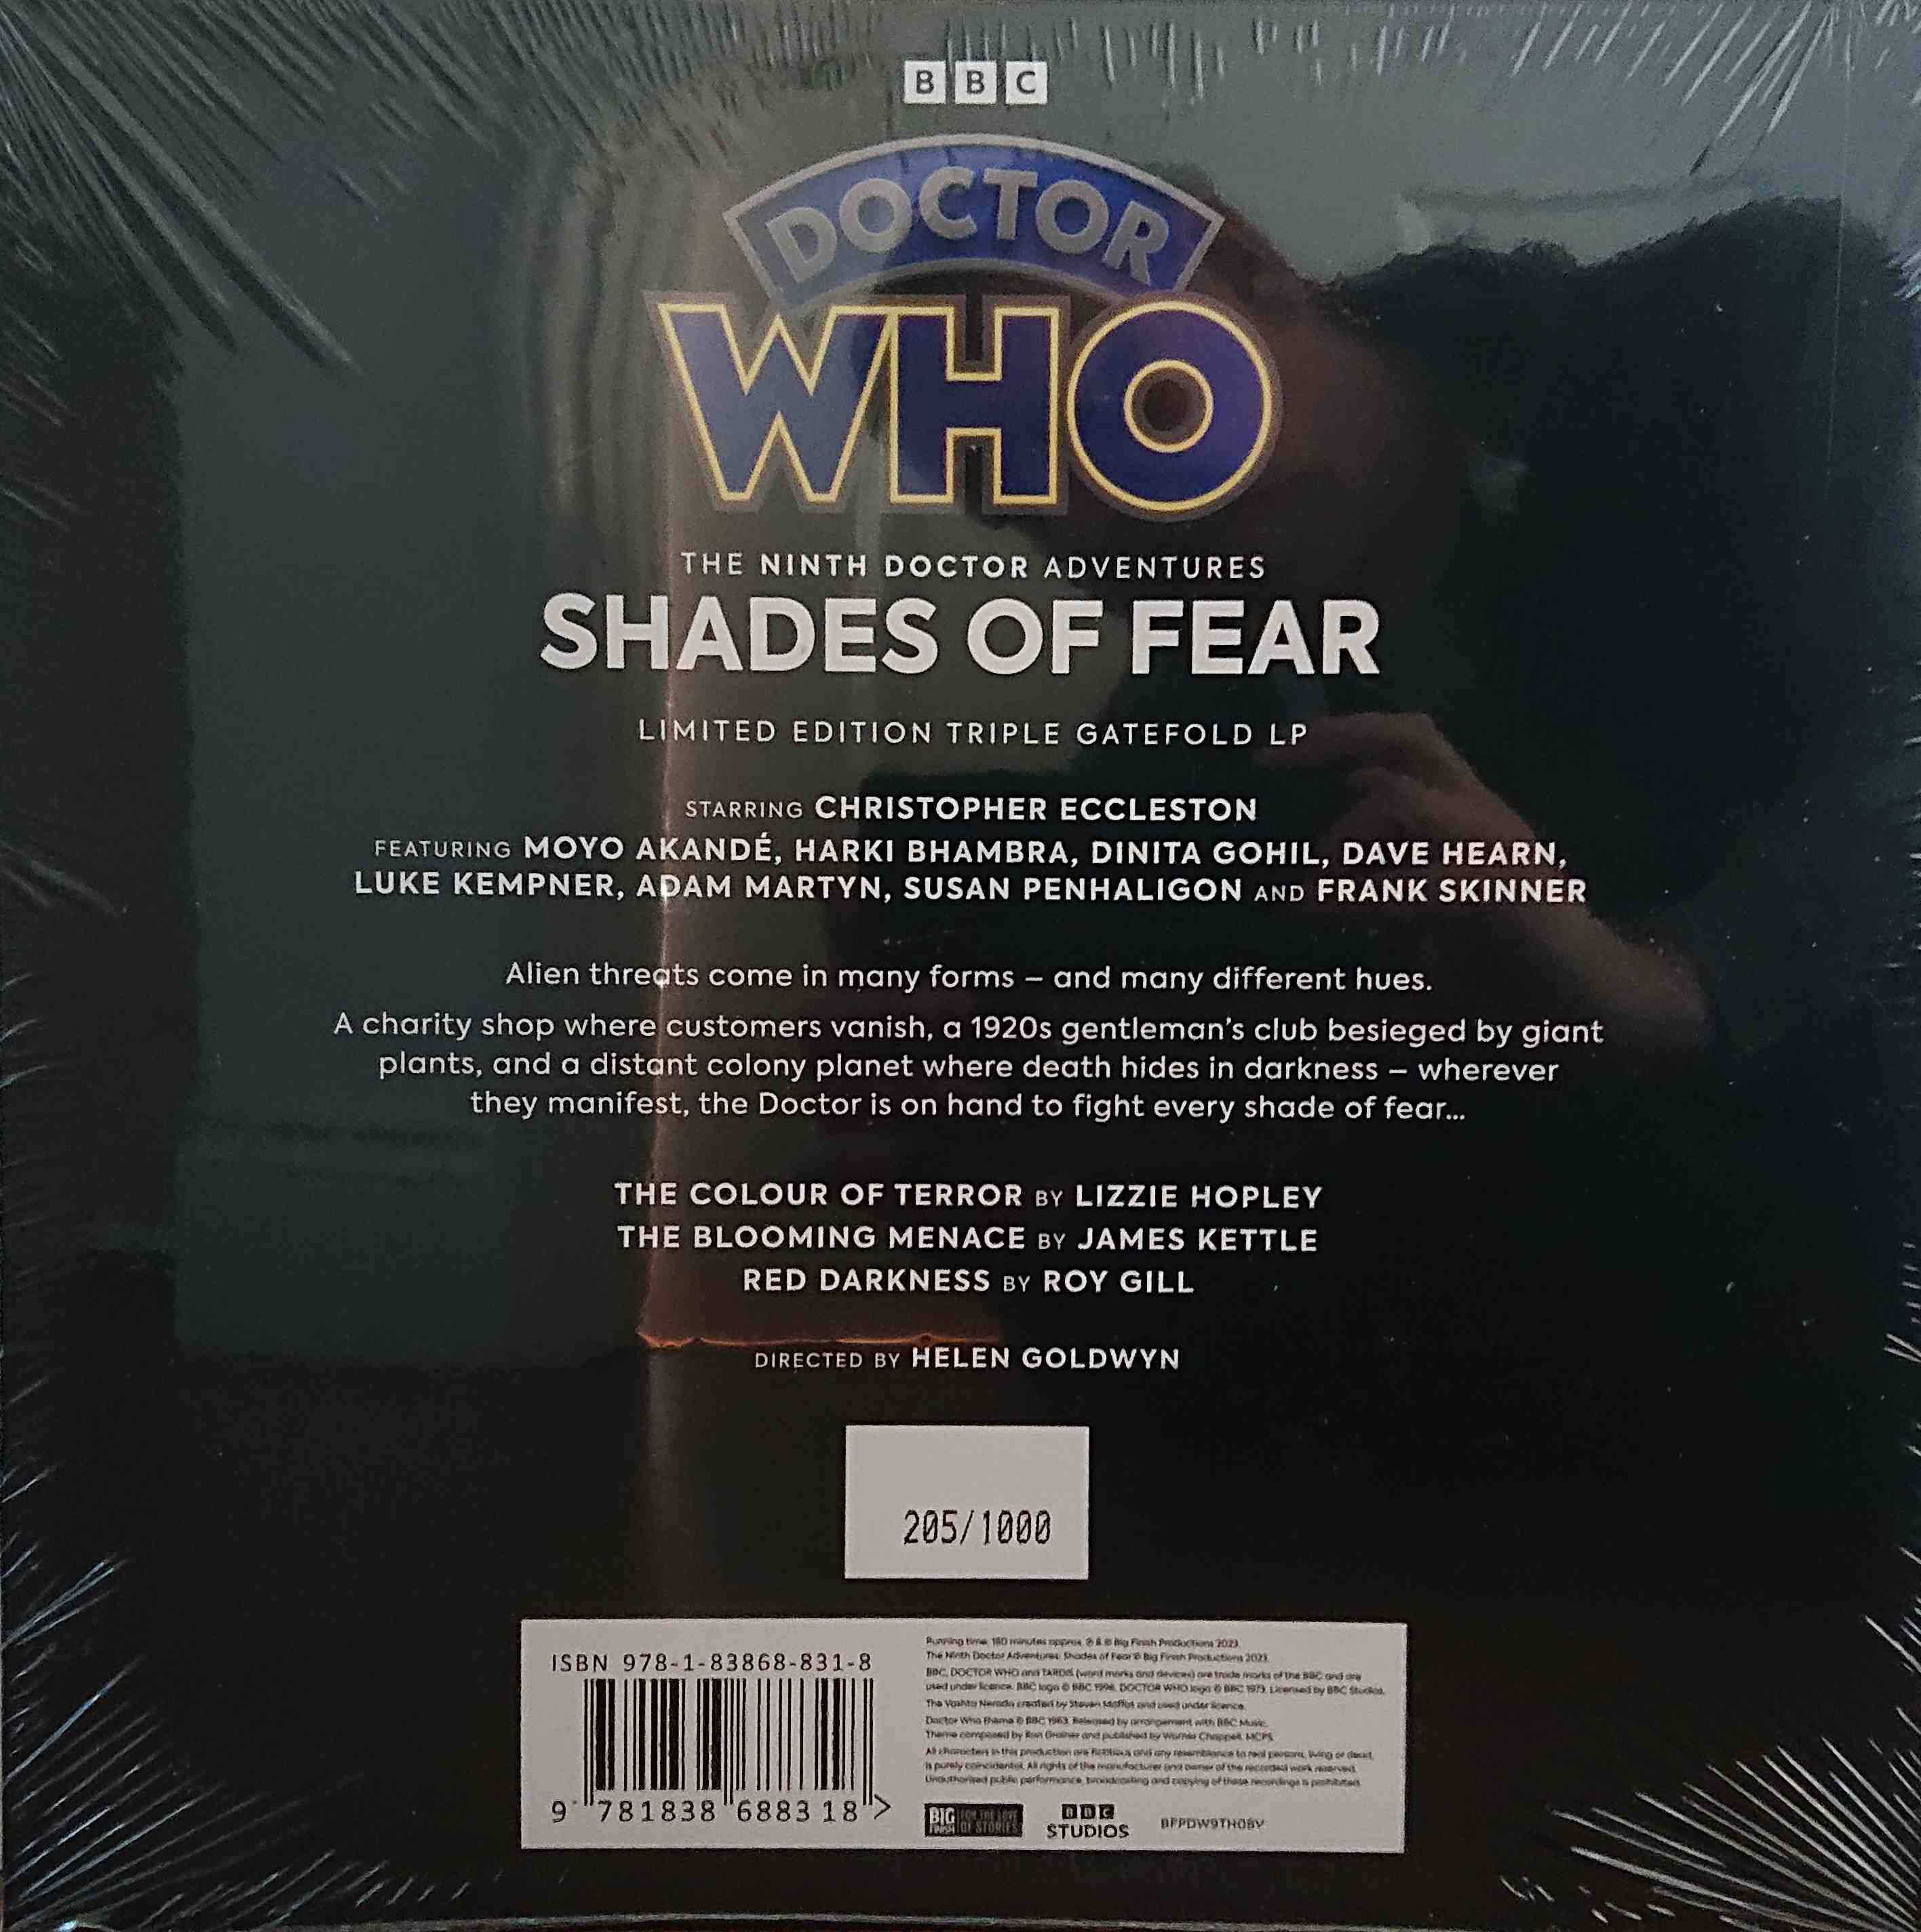 Picture of BFPDW9TH08V Doctor Who - The Ninth Doctor Adventures 2.4: Shades of fear by artist Lizzie Hopley / James Kettle / Roy Gill from the BBC records and Tapes library